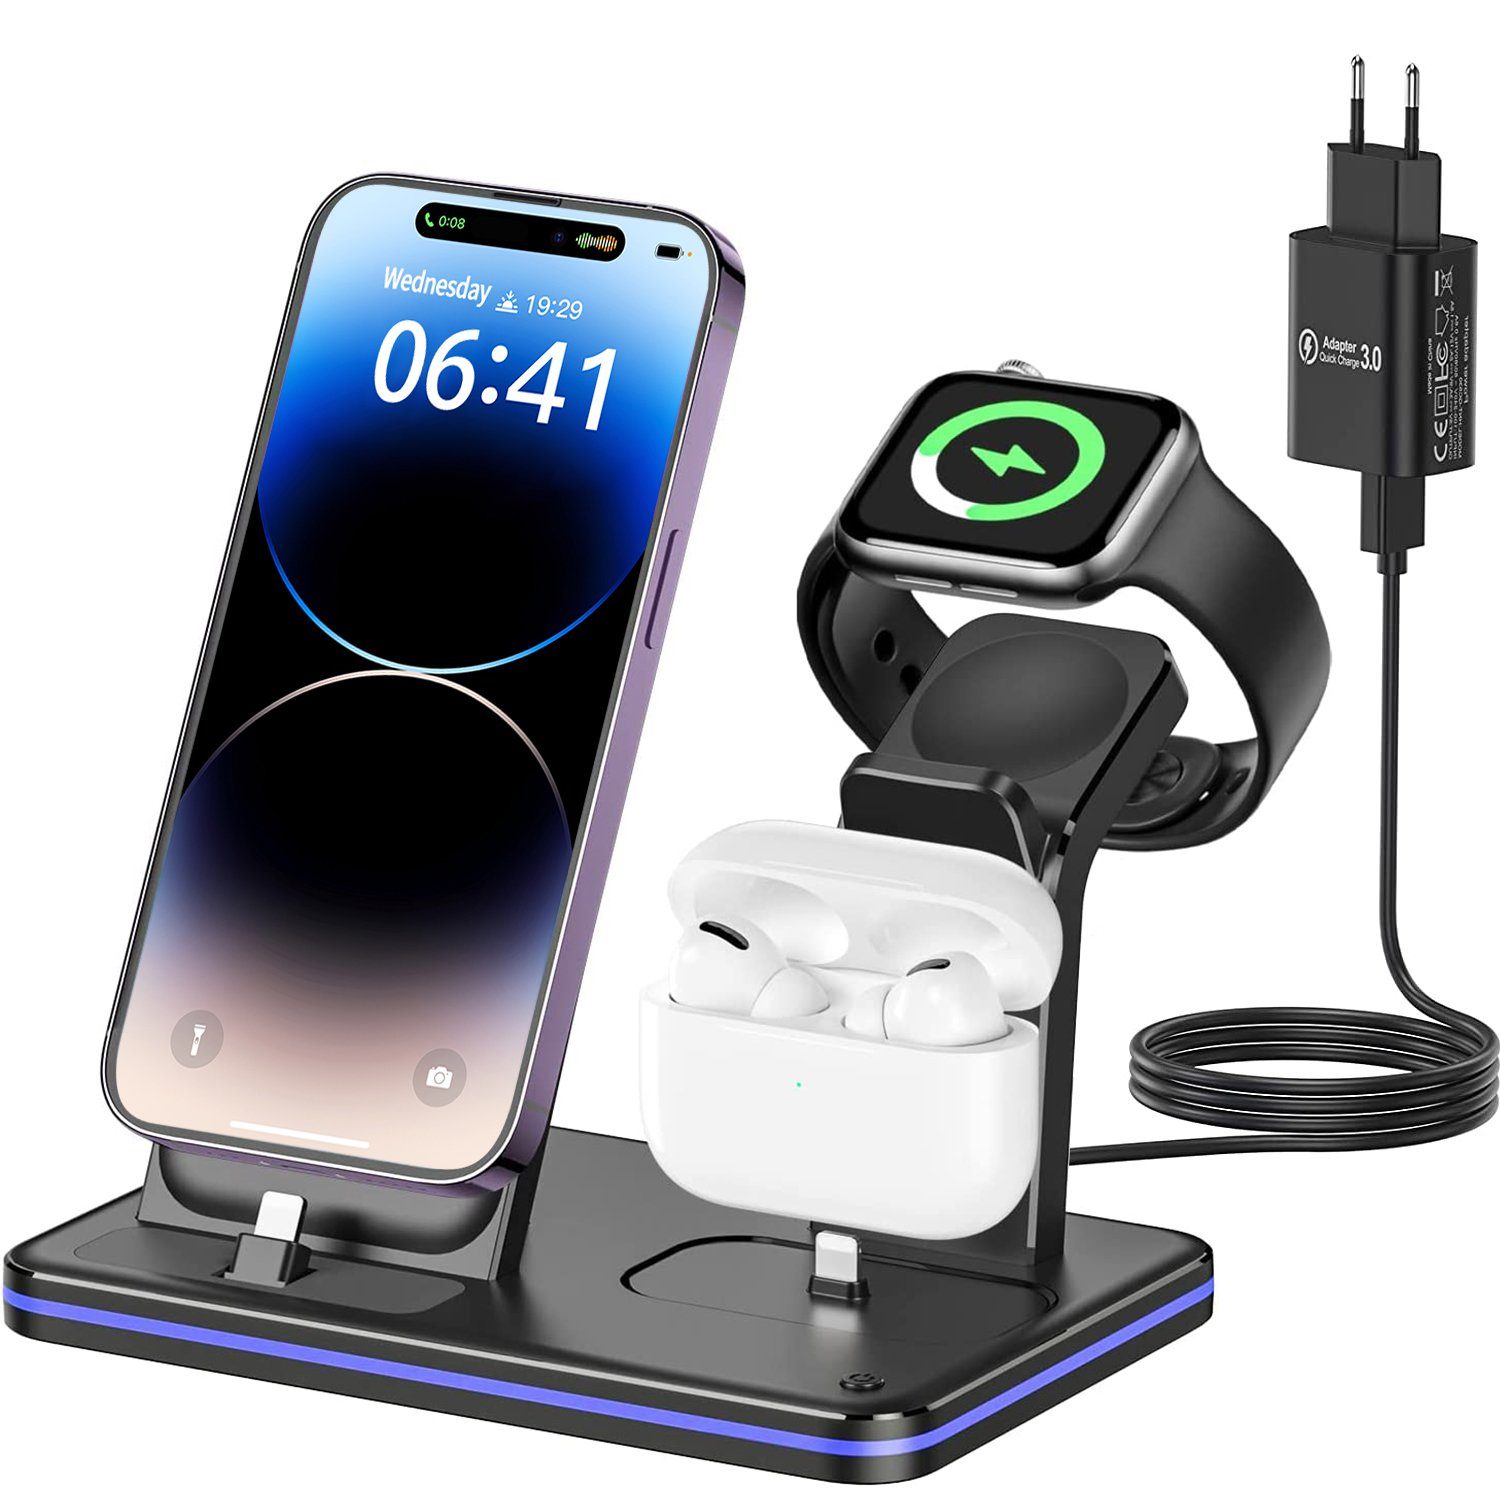 EUARY Induktive Ladestation Apple 3 in 1 iPhone iWatch Airpods Induktions  Induktions-Ladegerät (Kabellose Ladegerät Handy Induktions Ladegeräte,  Wireless Charger für Apple iWatch iPhone Airpods Charging Station)